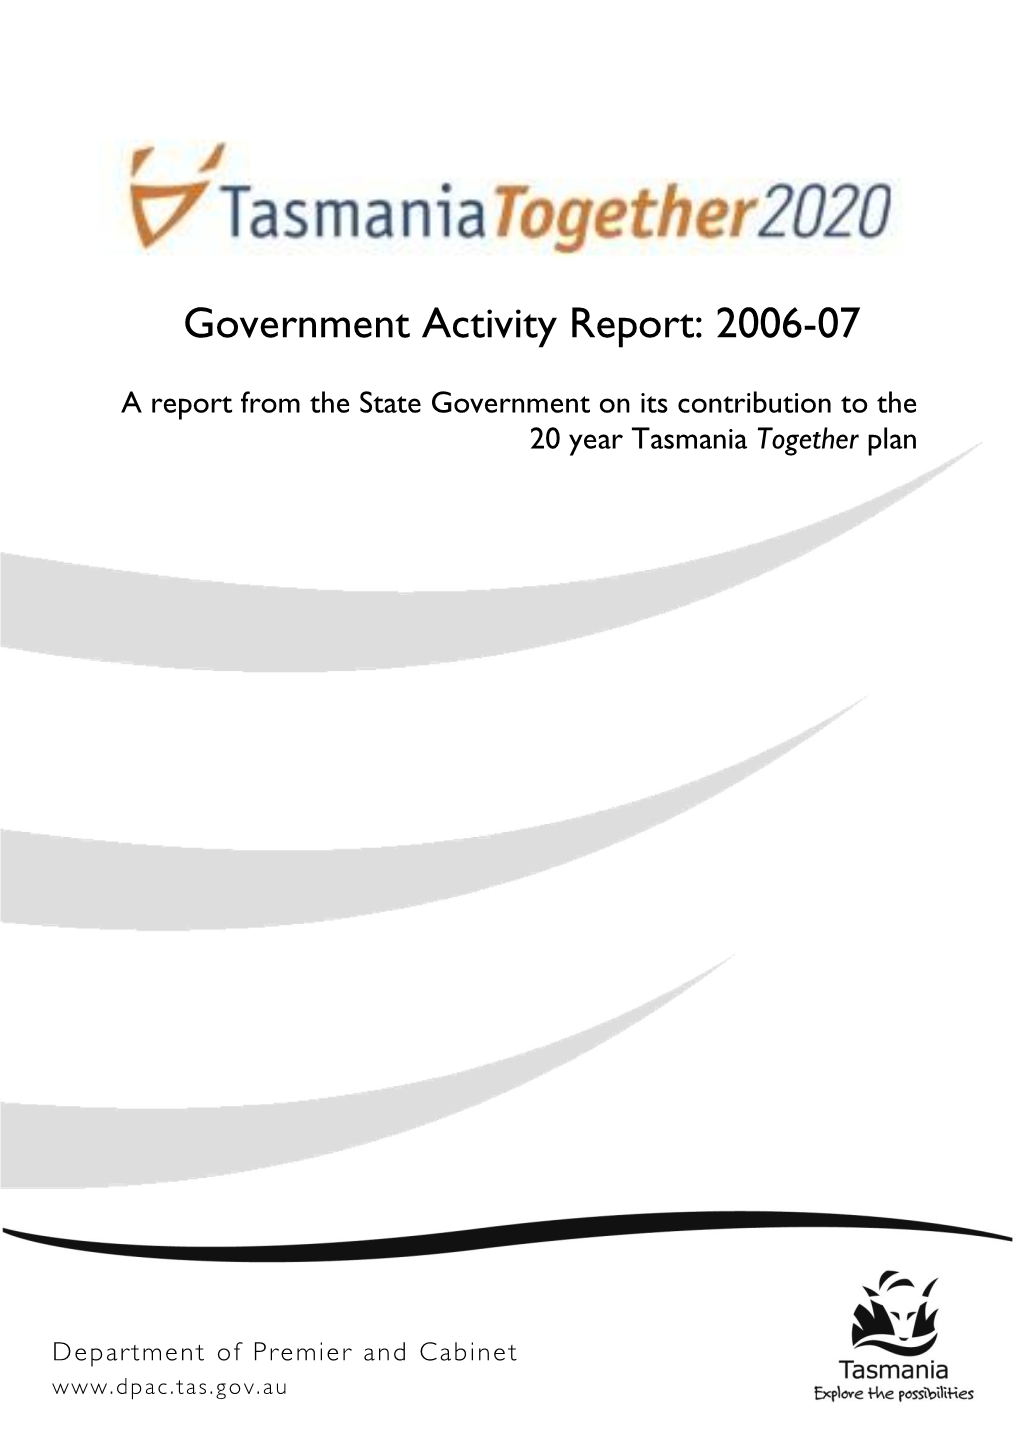 Tasmania Together Government Activity Report 2006-07